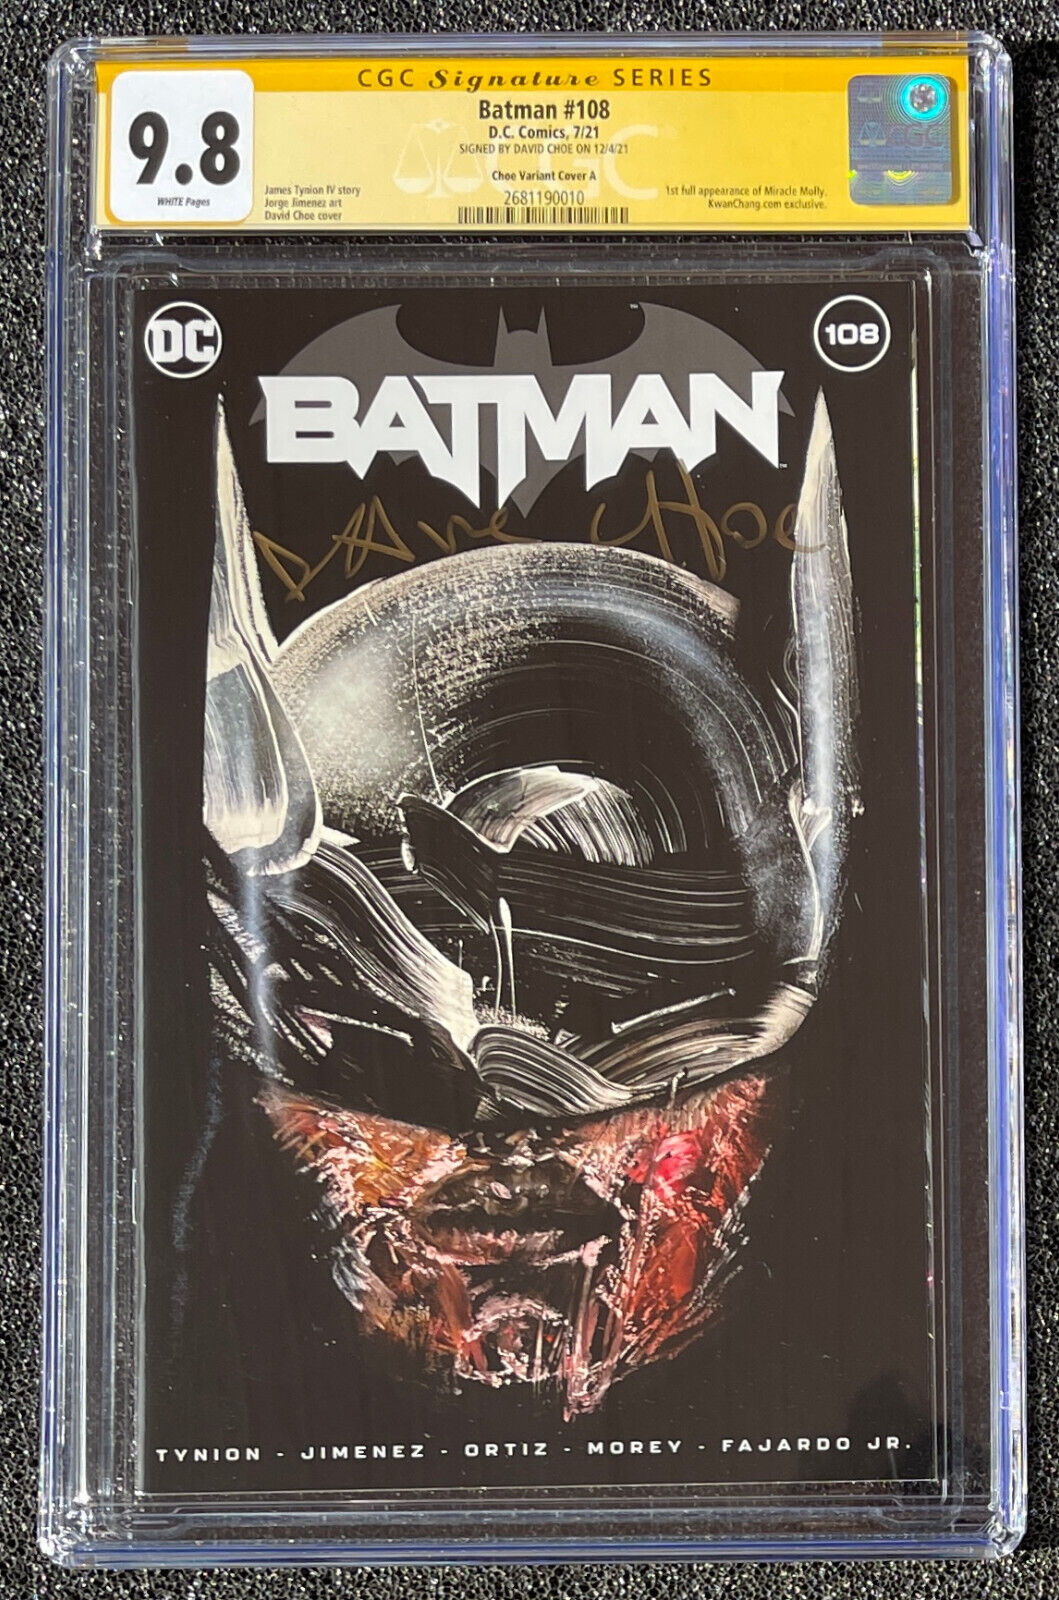 Beef CGC Signed DAVID CHOE SS 9.8 Batman # 108 Variant Exclusive Miracle Molly !